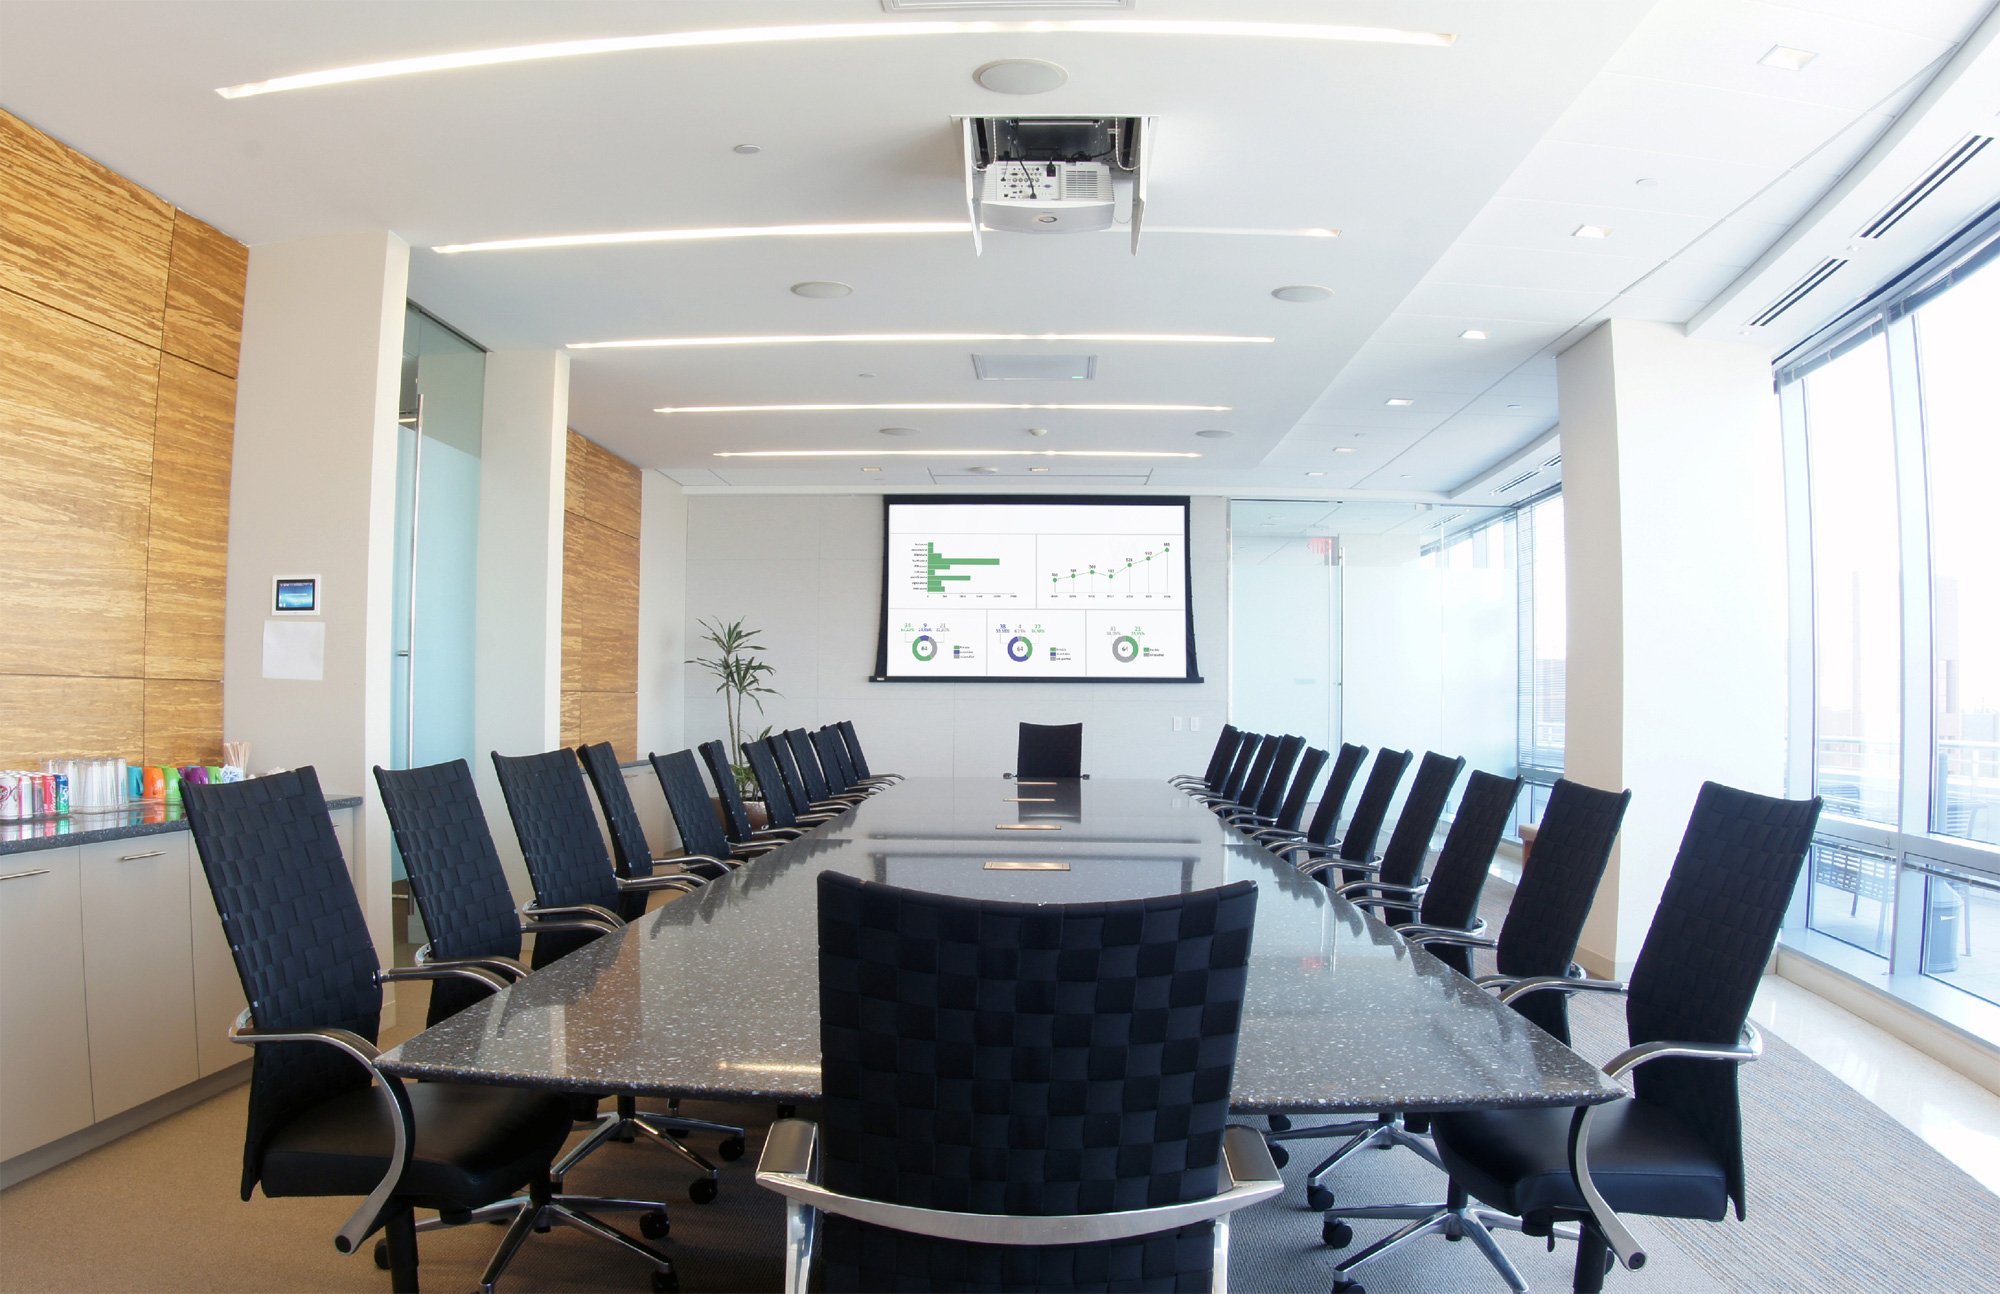 Conference Room Commercial Audio Video Installation